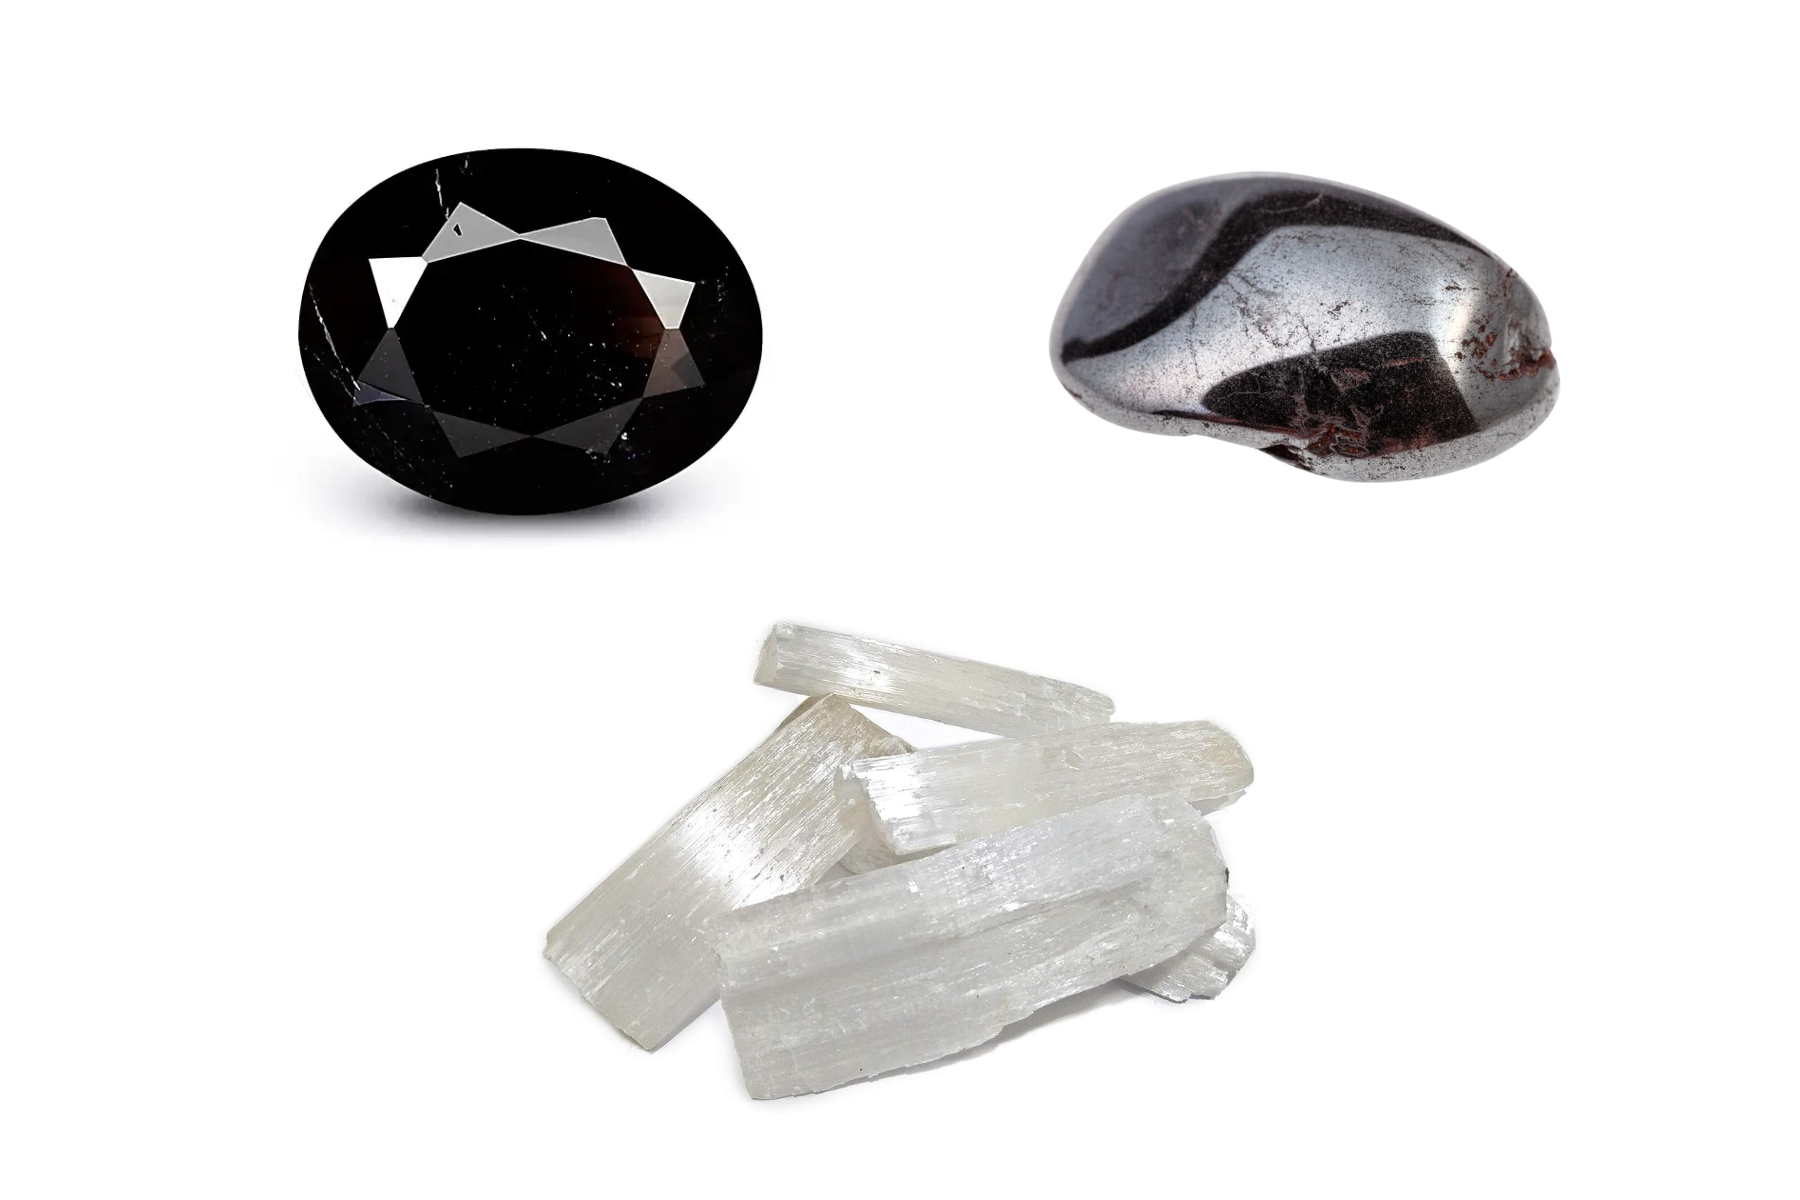 Three distinct crystals for removing impediments